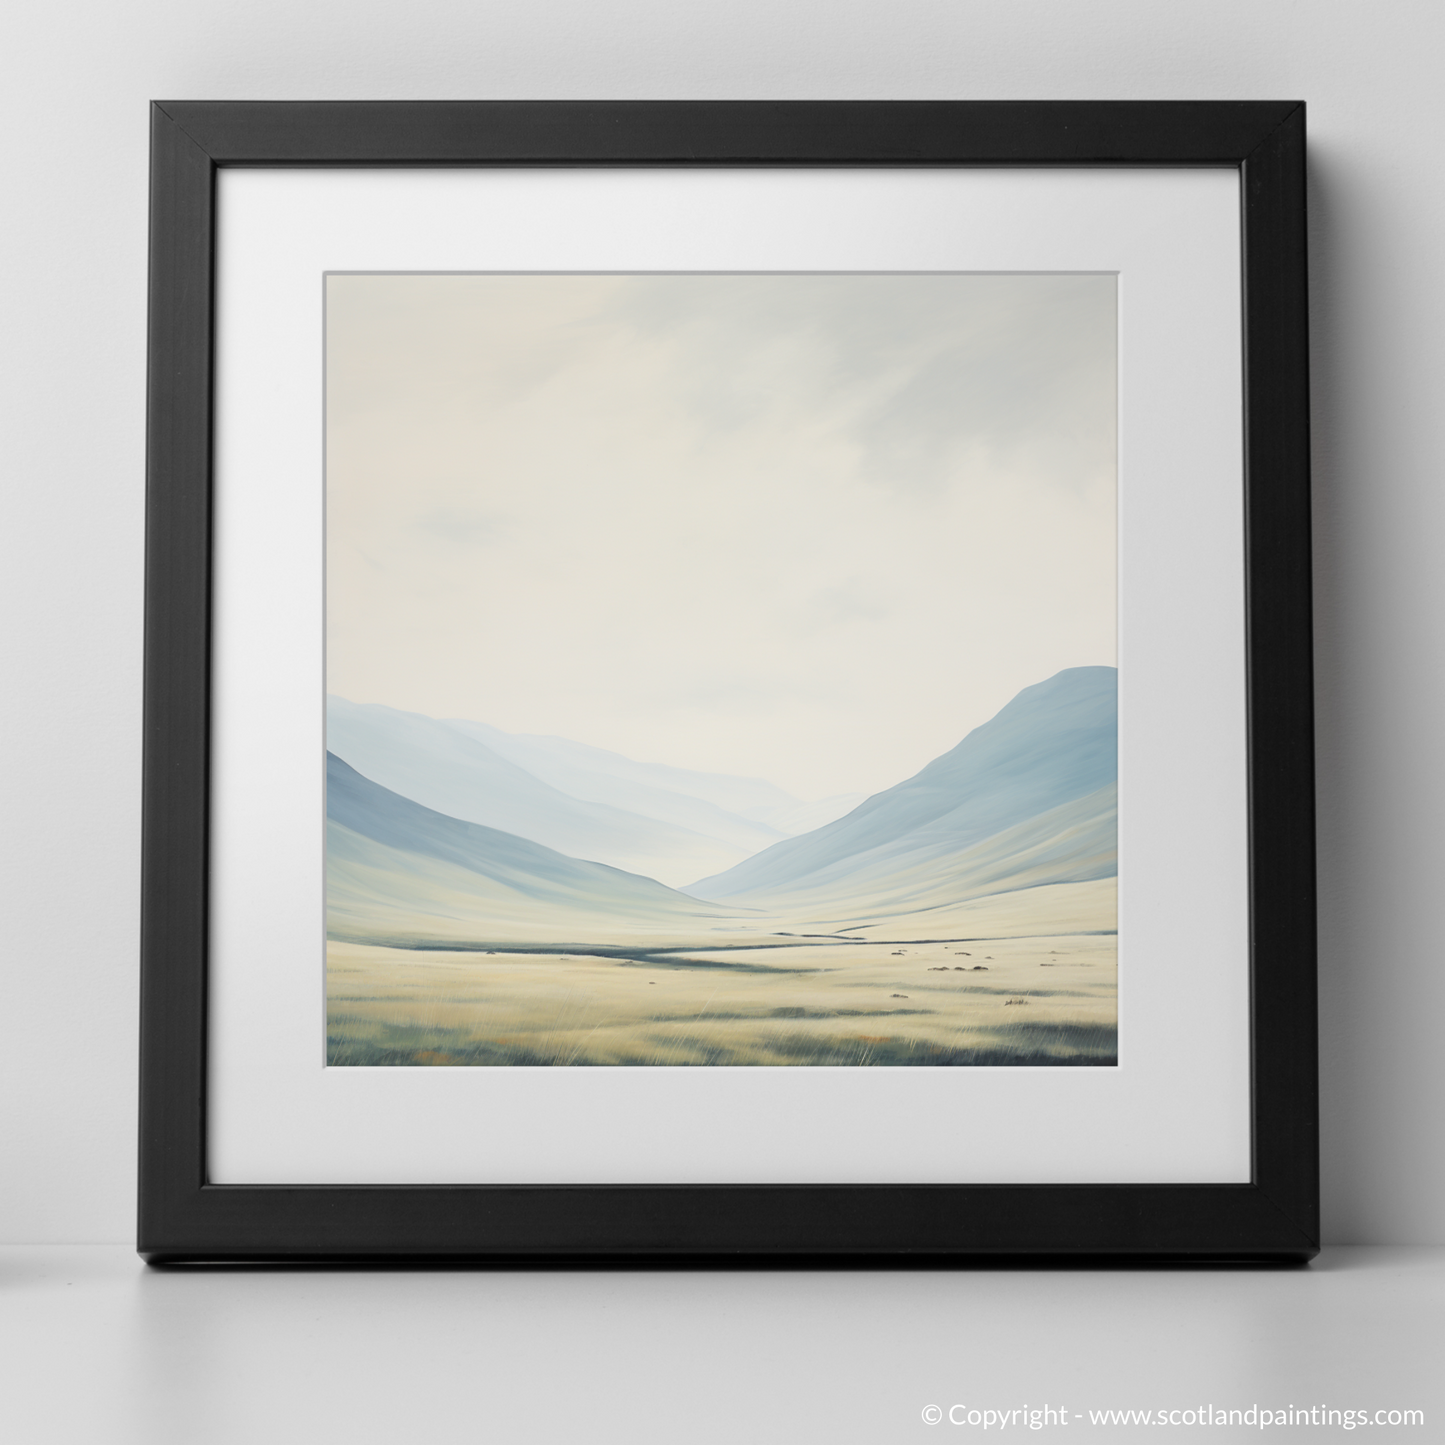 Art Print of The Cairnwell with a black frame